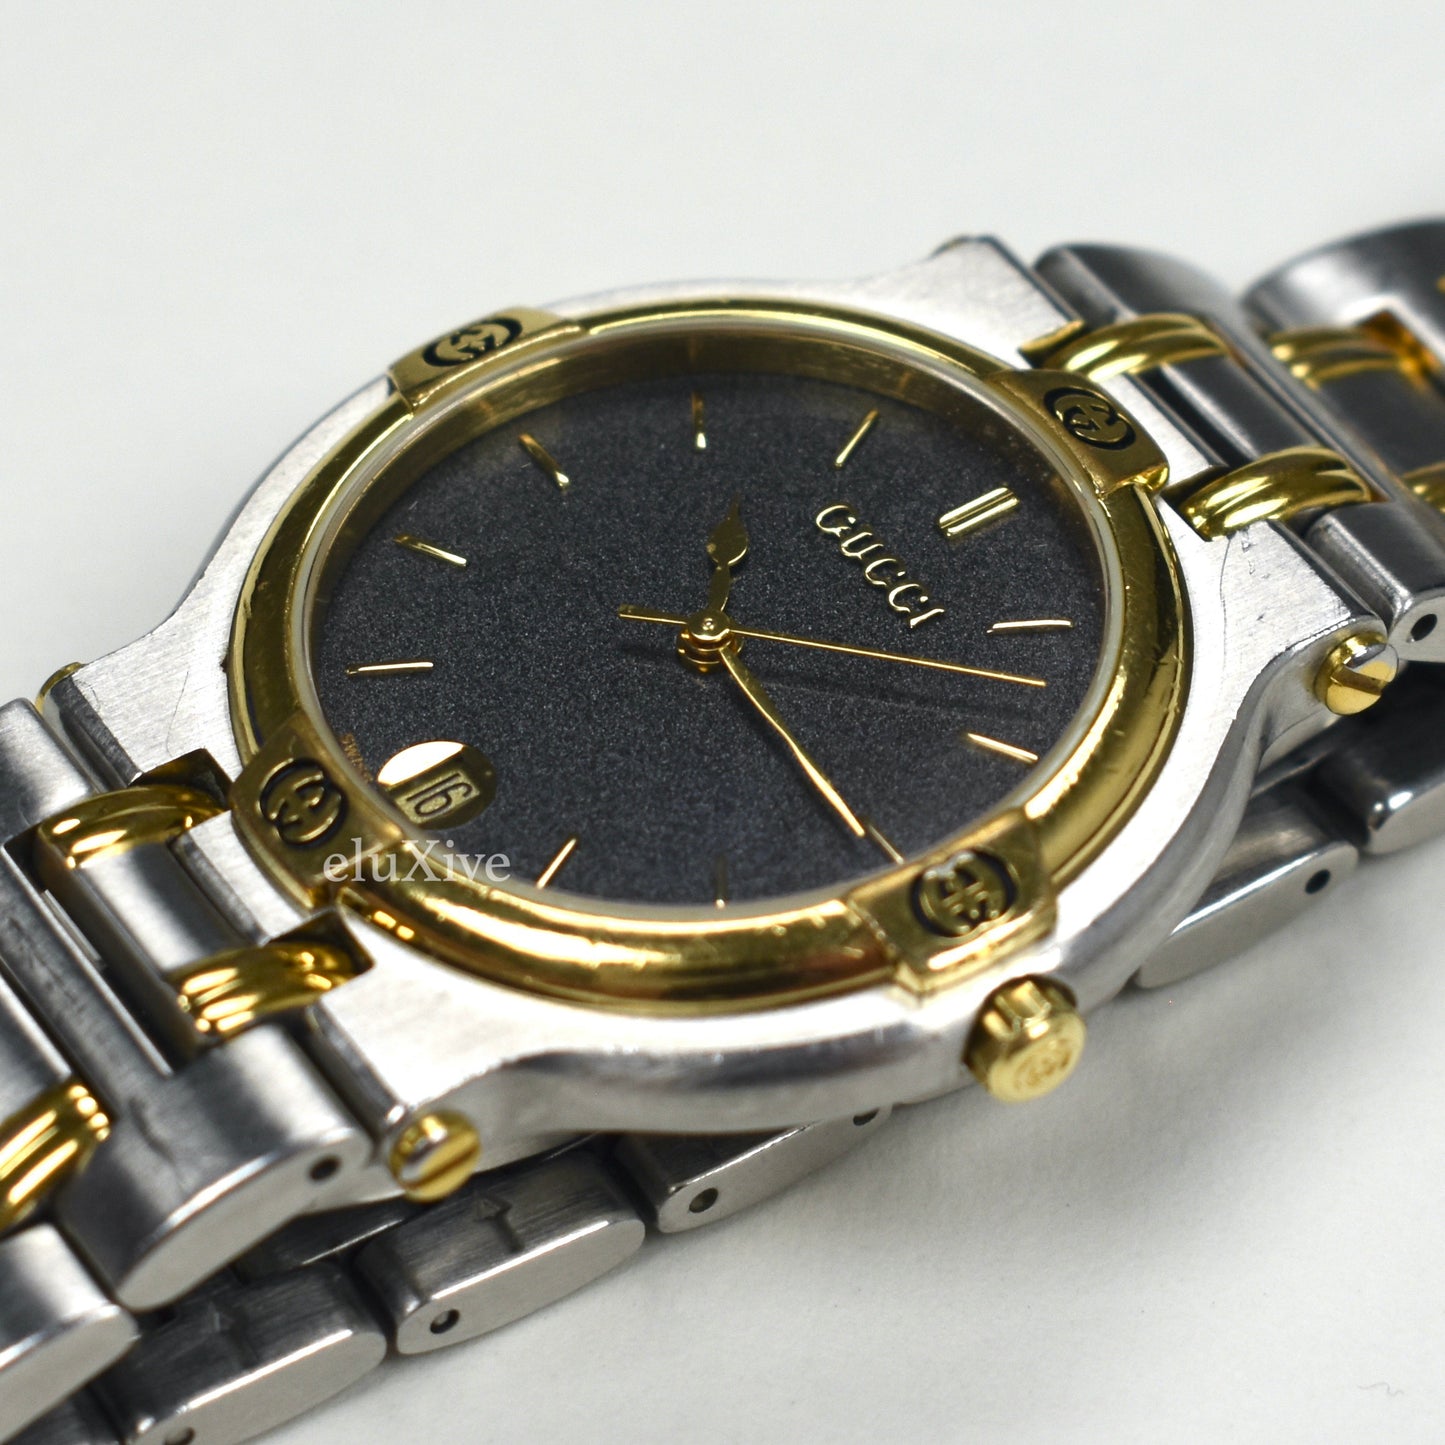 Gucci - 9000M Gold / Steel Graphite Dial Watch (Solid Links)